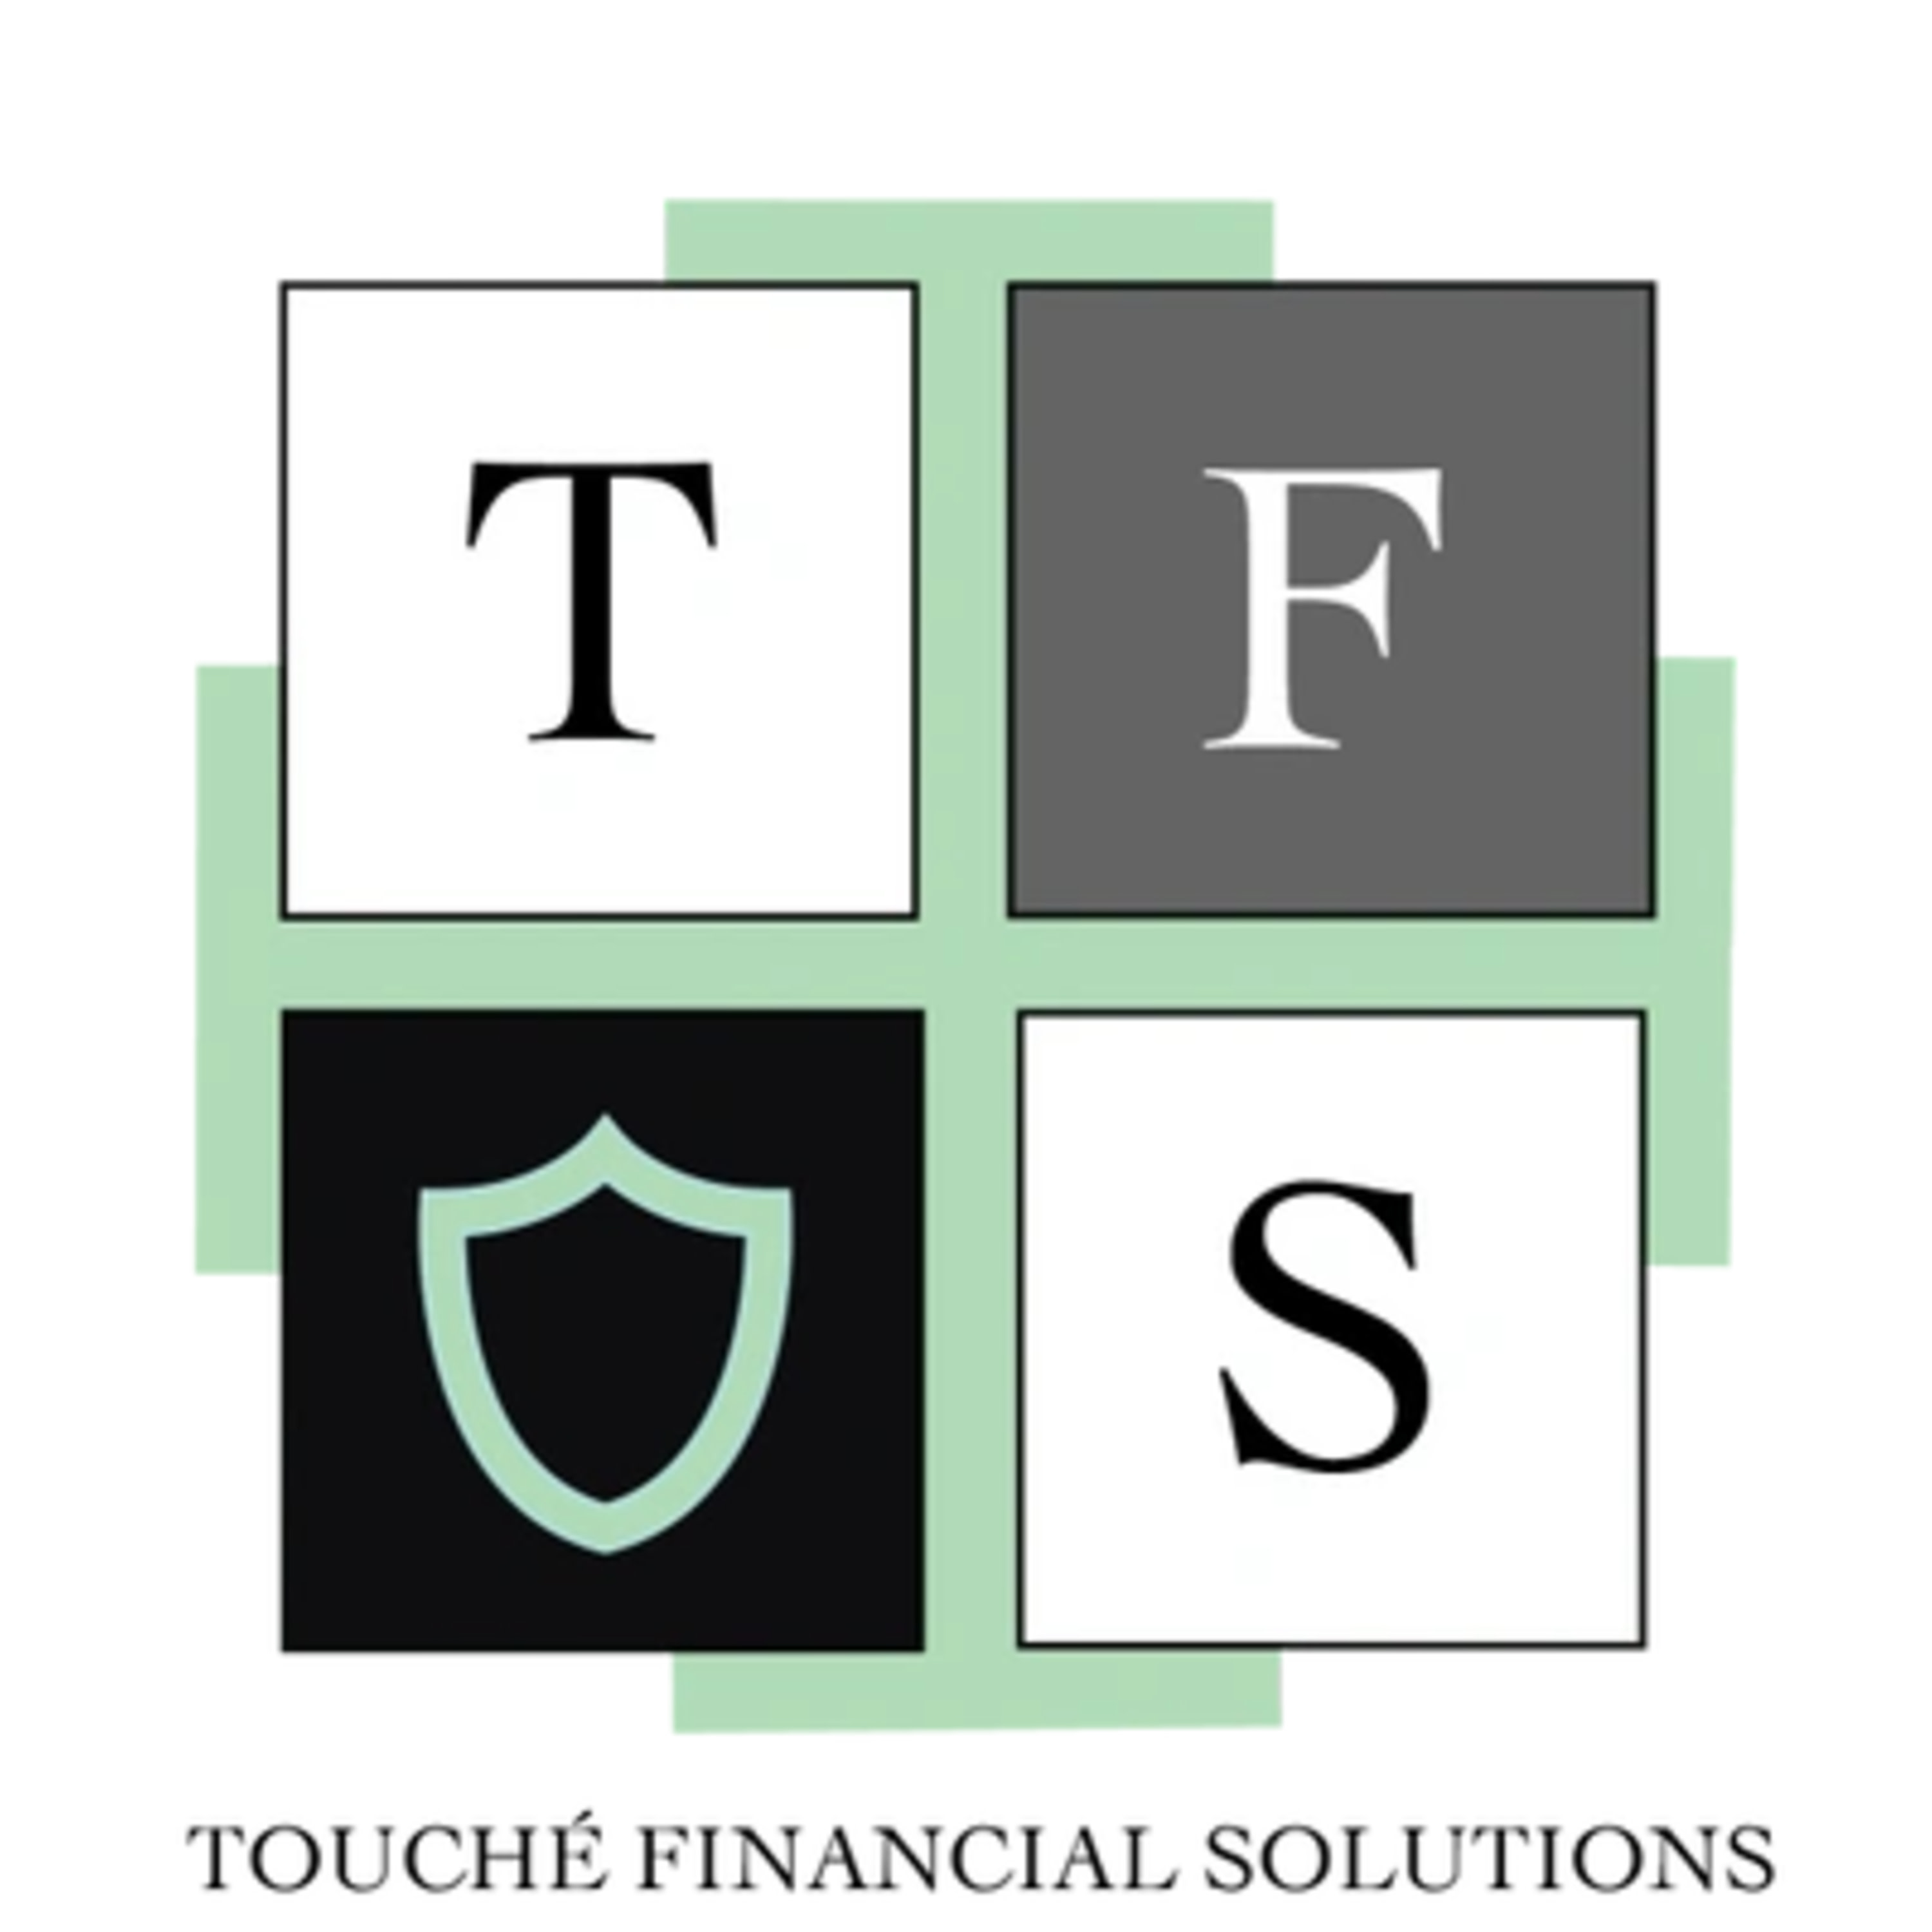 Touché Financial Solutions: A Conversation with Sierra Thomas